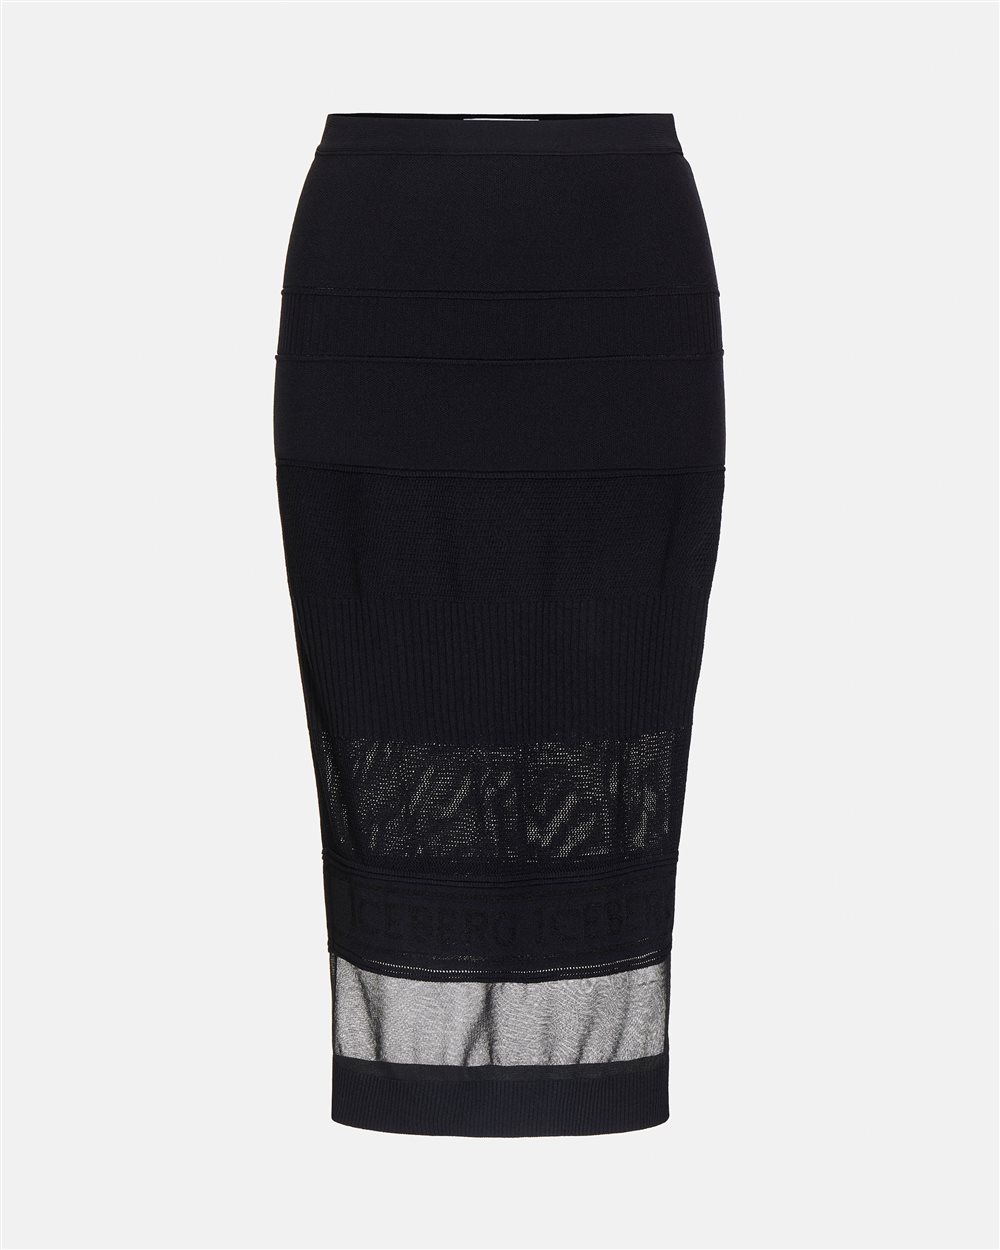 Pencil skirt with logo - Iceberg - Official Website